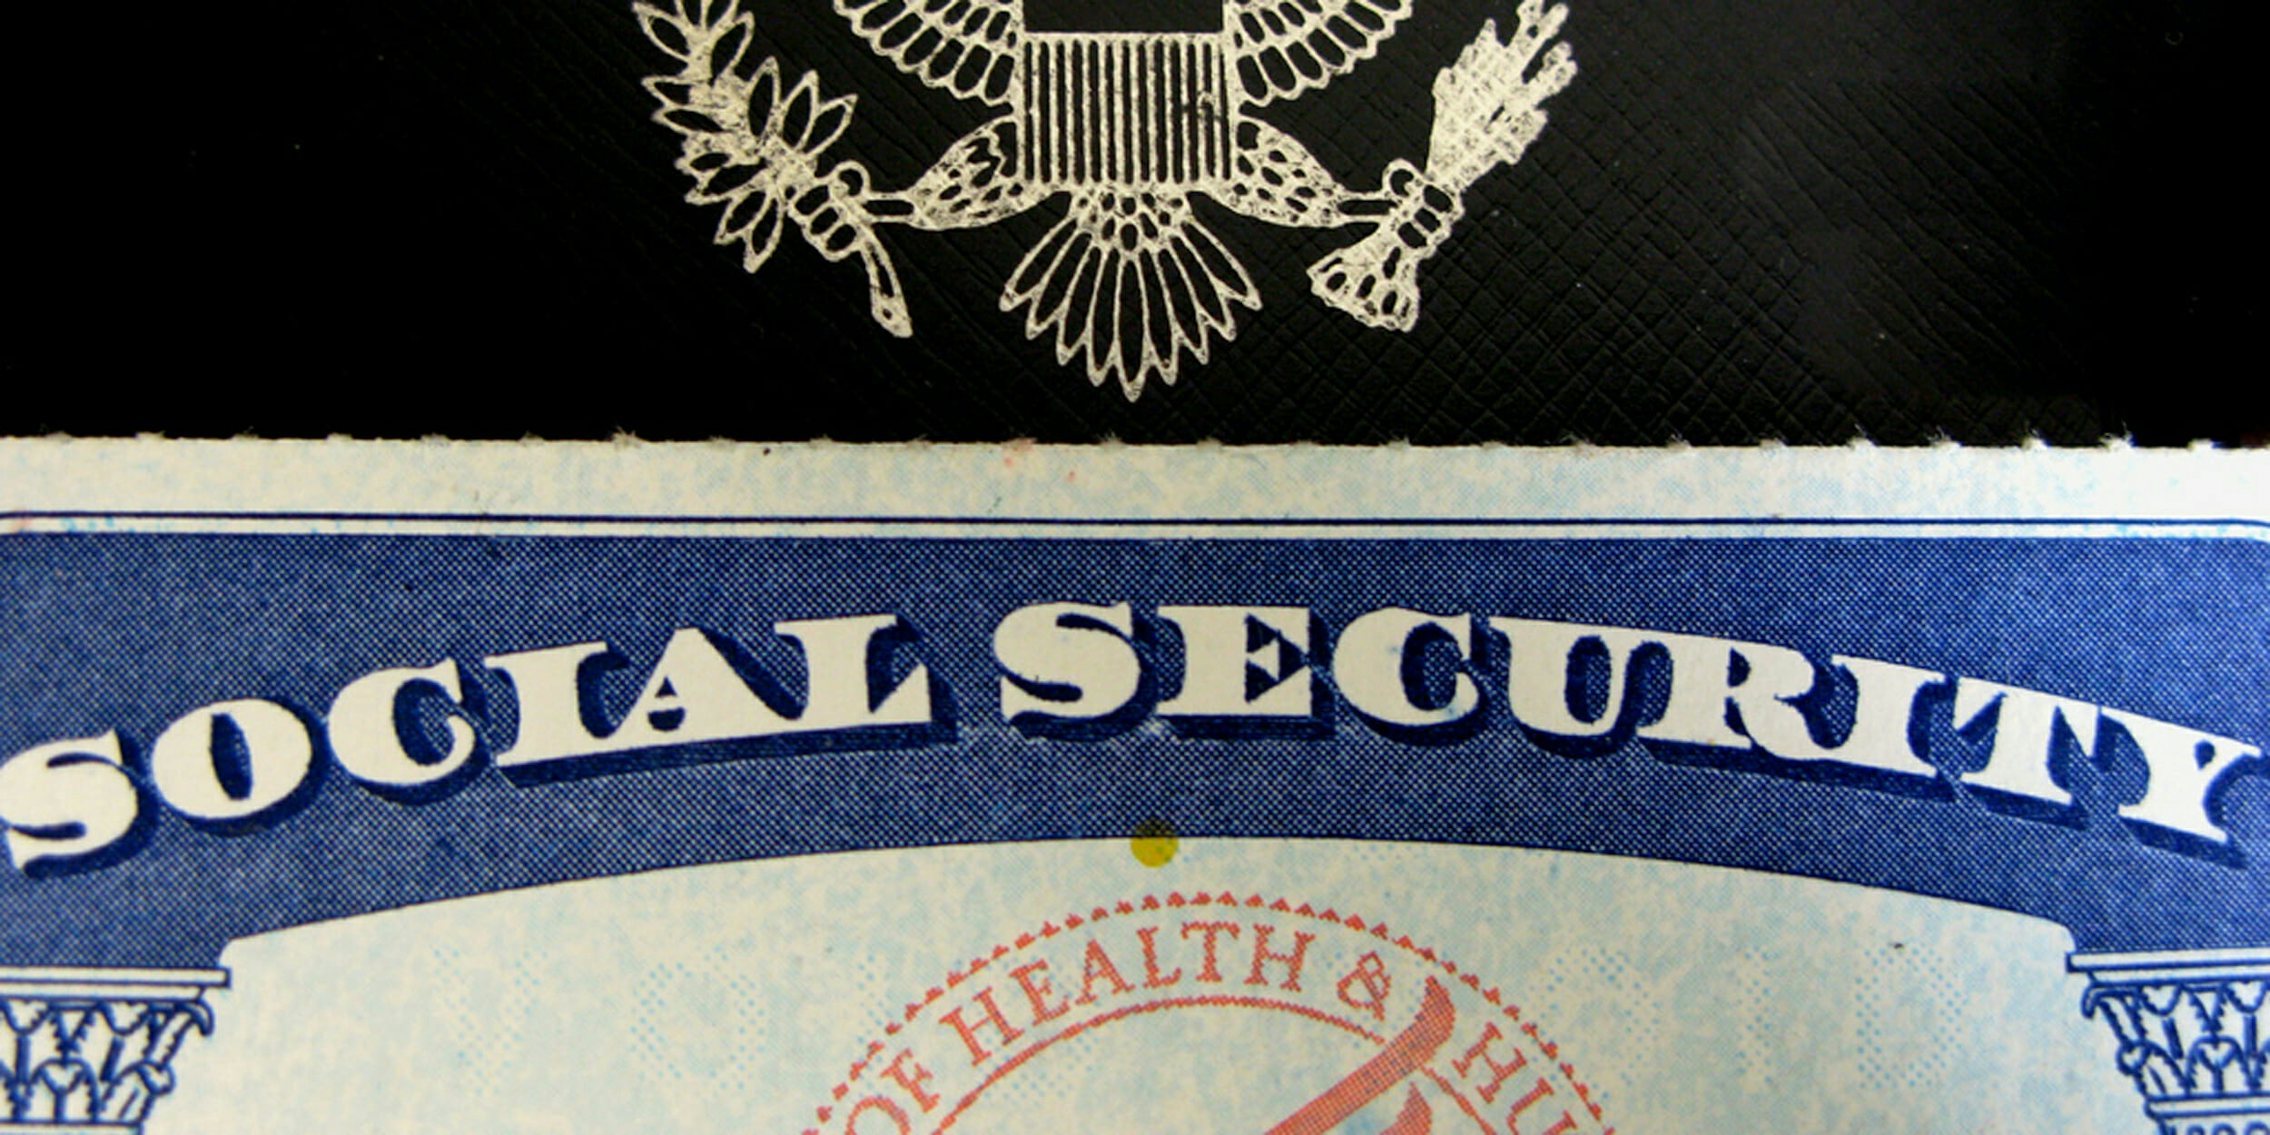 The Trump administration is reportedly looking into replacing Social Security numbers as an identifier.